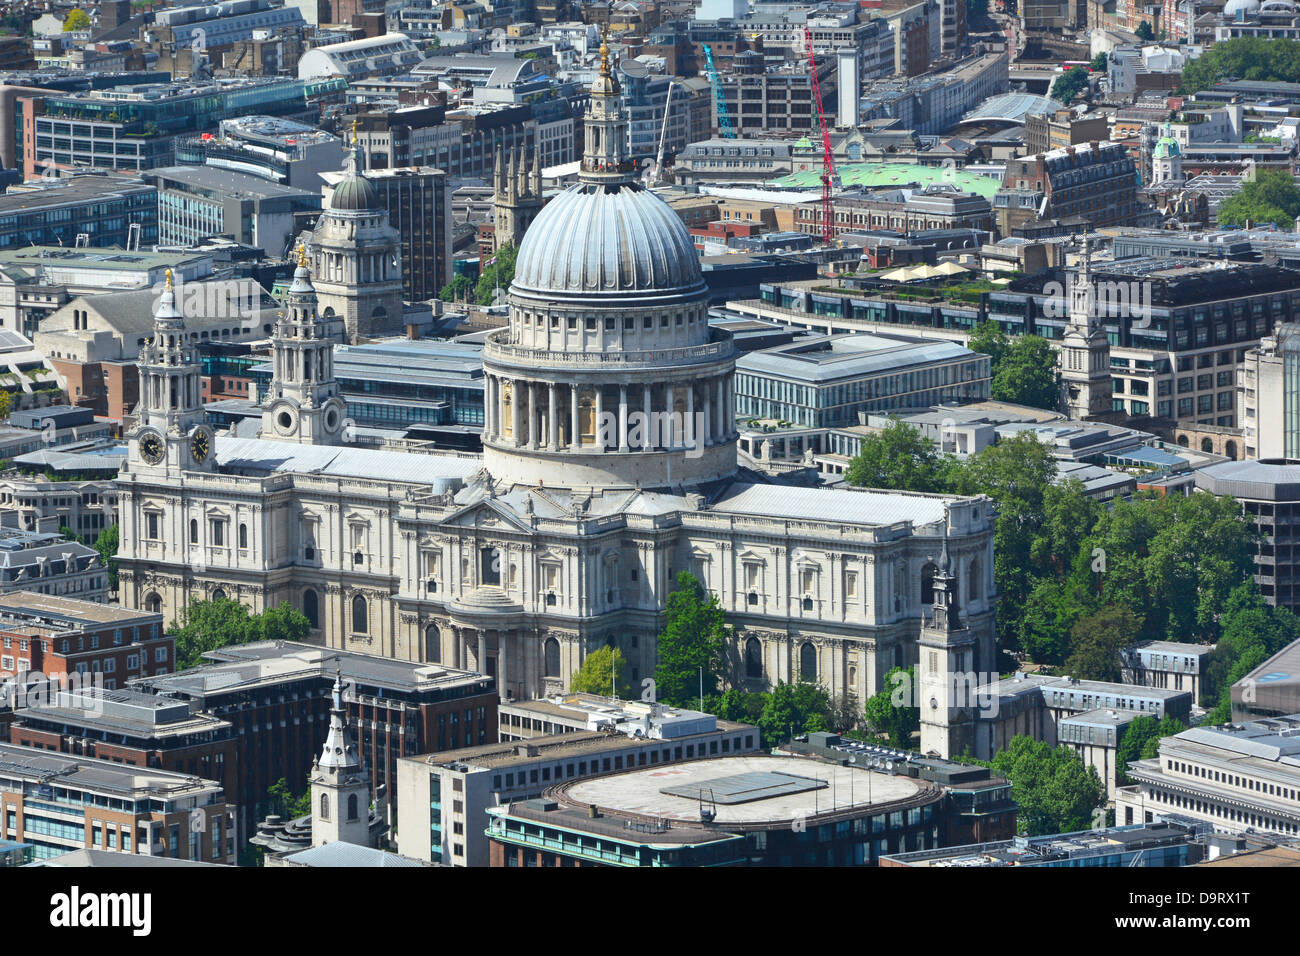 Aerial view of St Pauls cathedral and dome summertime Stock Photo